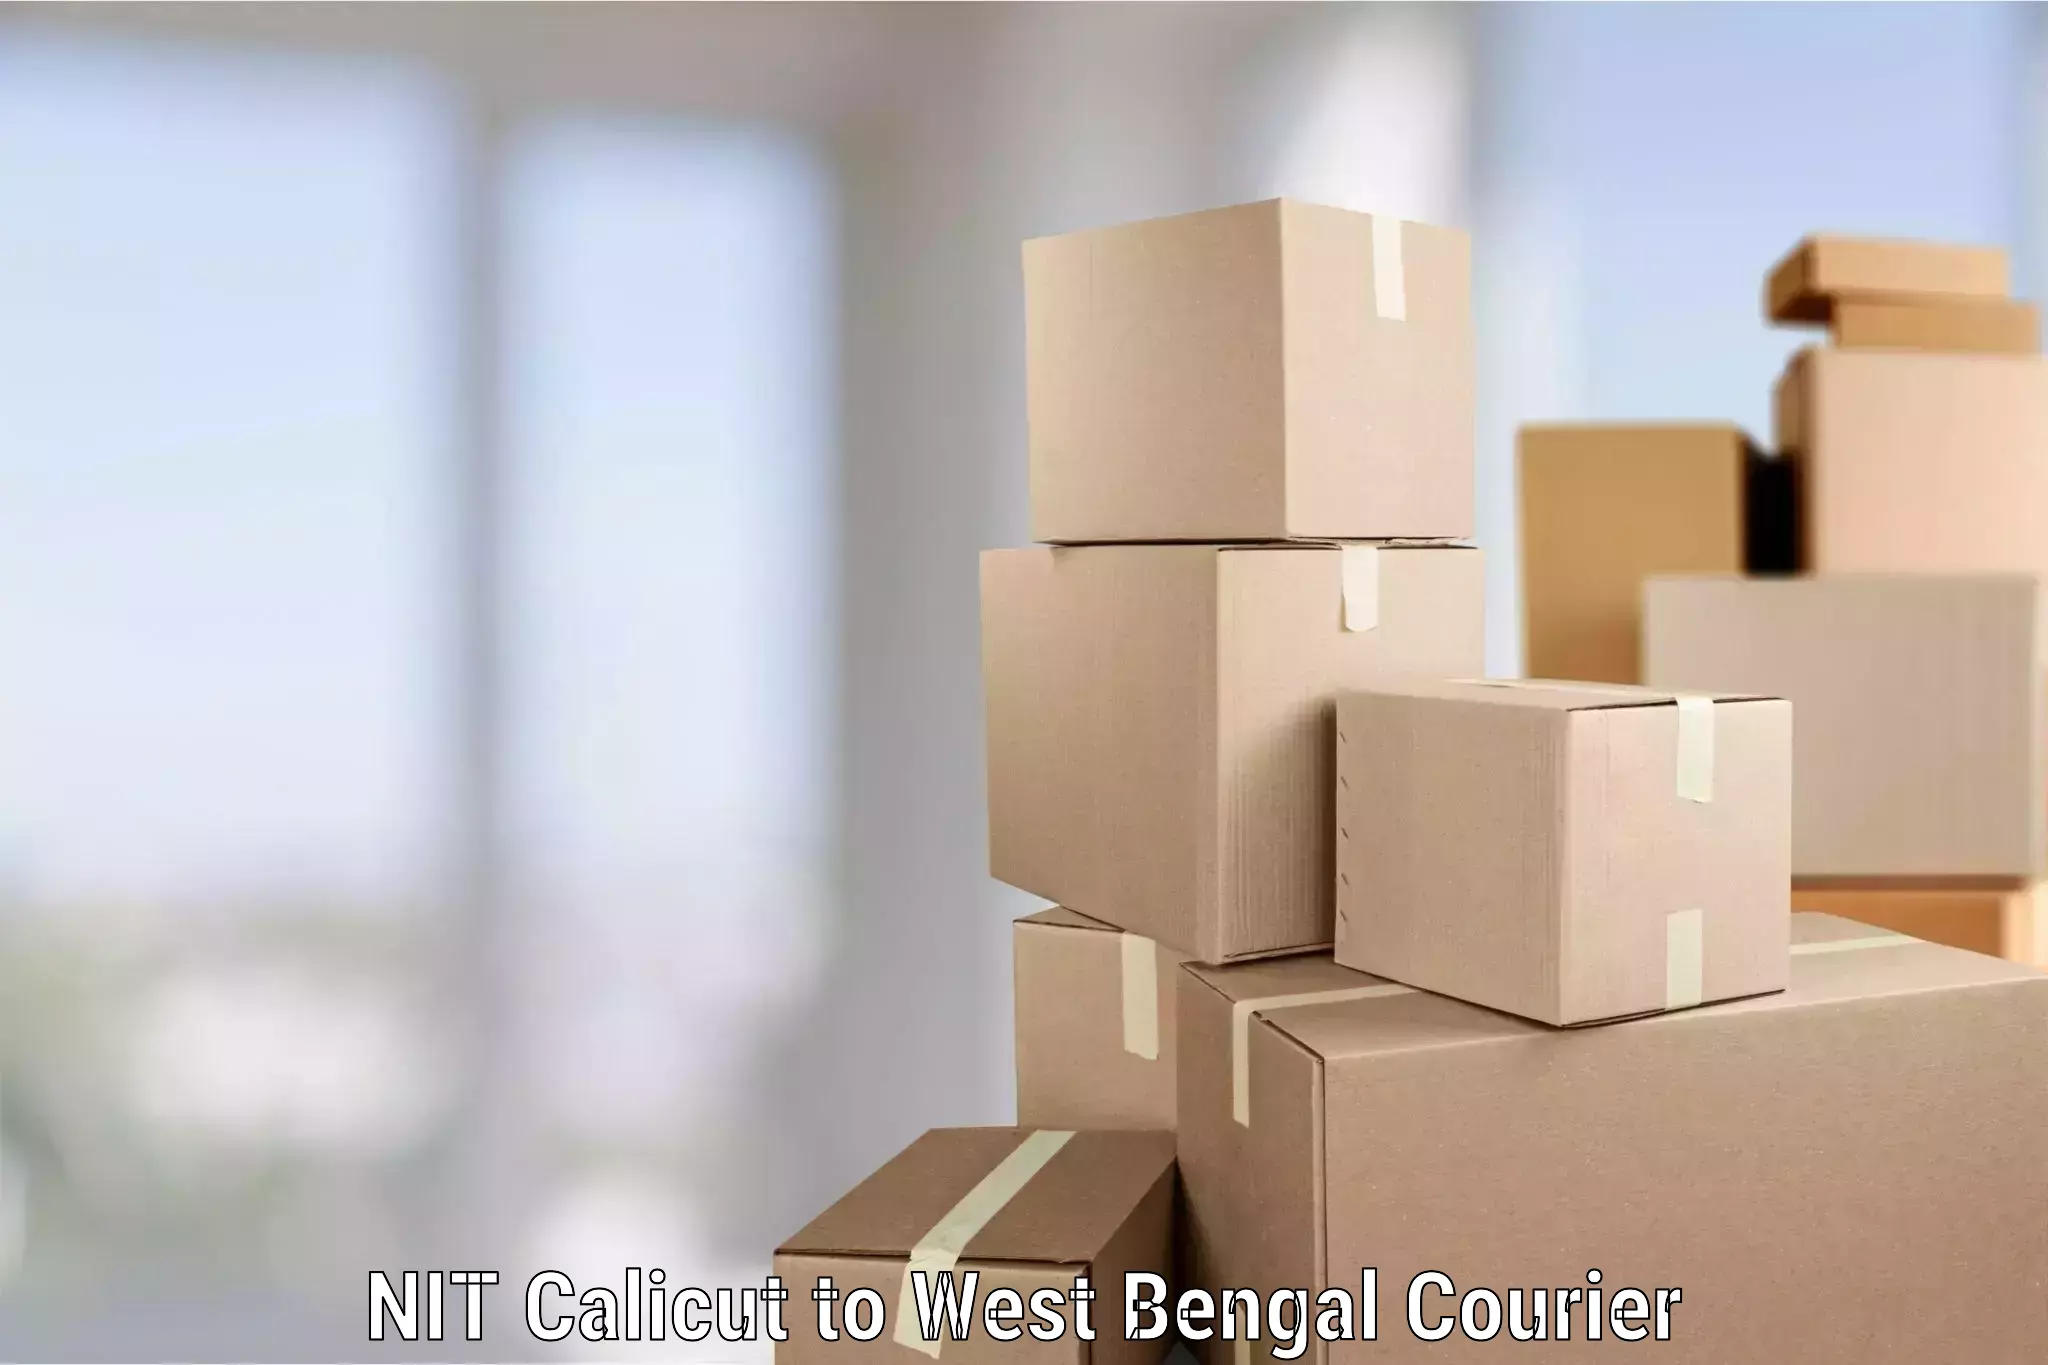 Quality relocation services NIT Calicut to The University of Burdwan Barddhaman